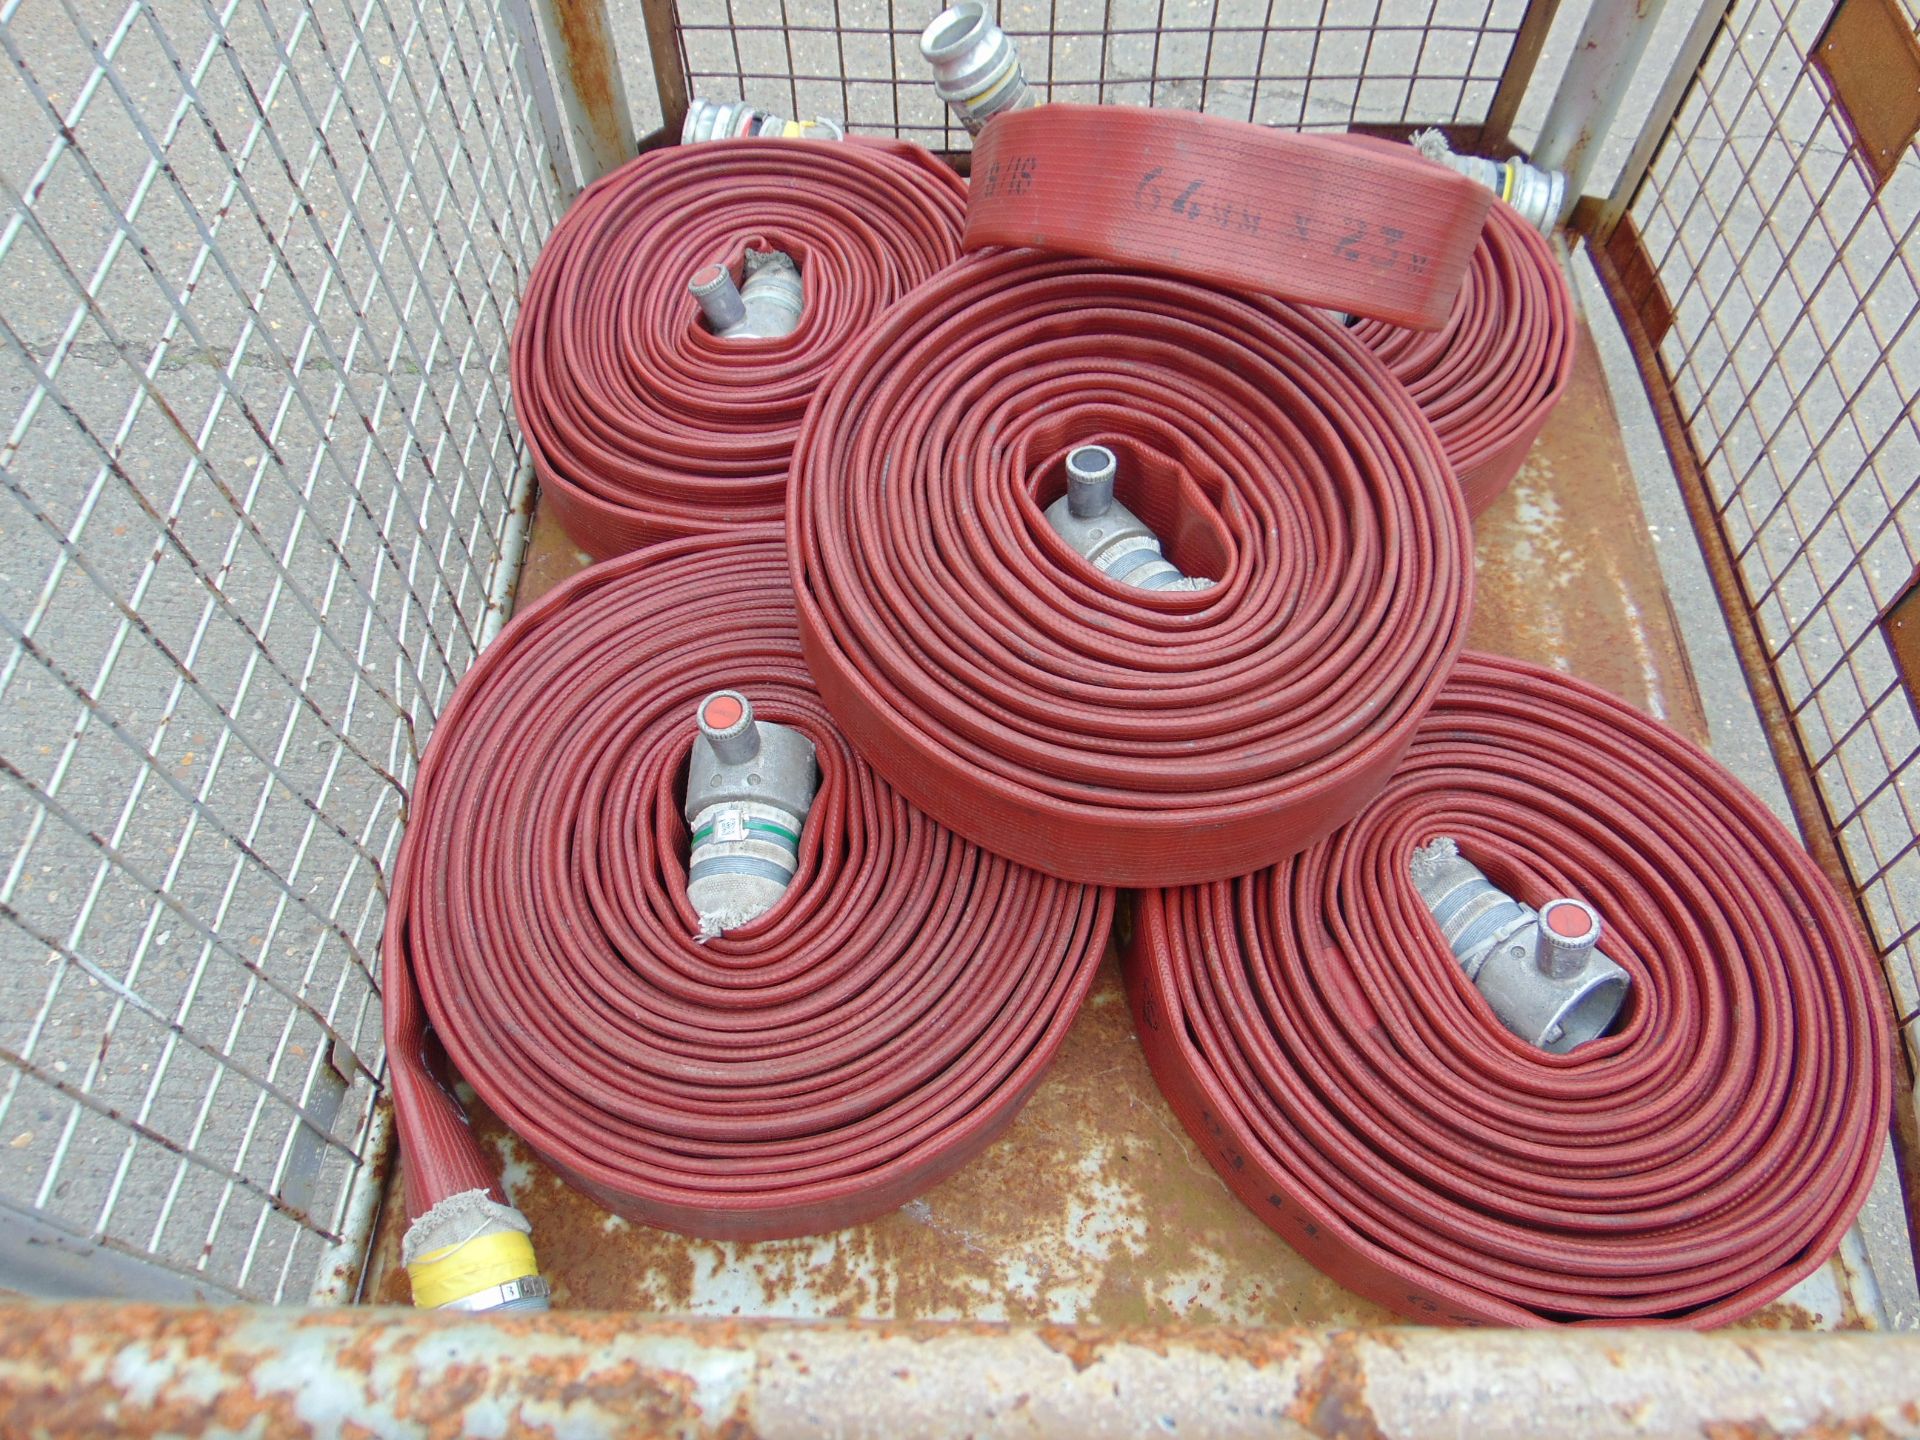 5 x Angus 64mm x 23m Layflat Fire Hoses with Couplings Sold as shown without warranty. - Image 2 of 4